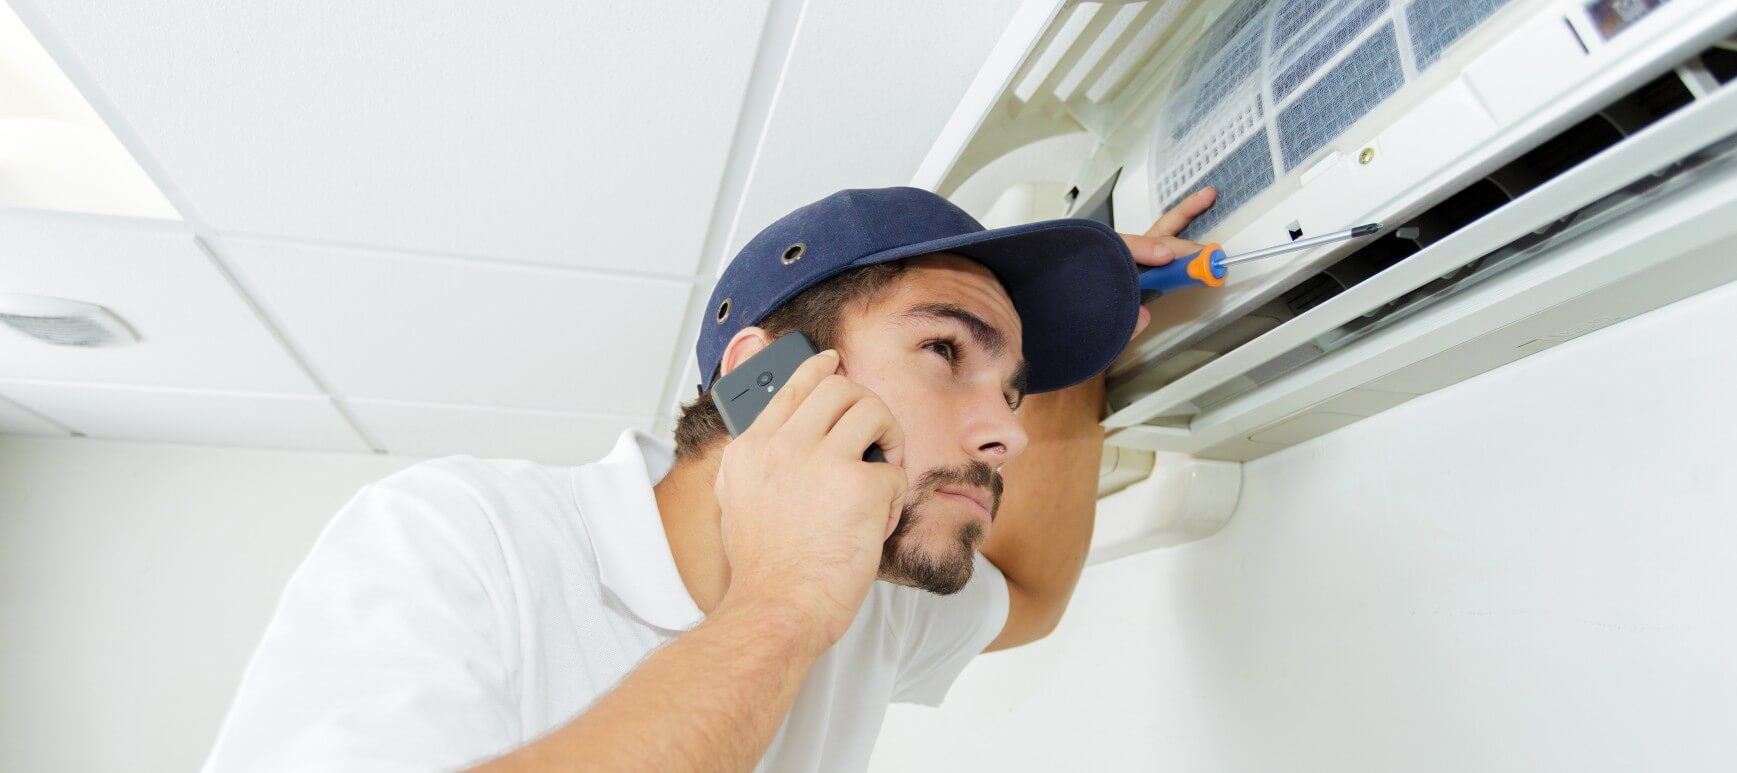 A man checking his air ducts to decide whether he need repairs or replacement